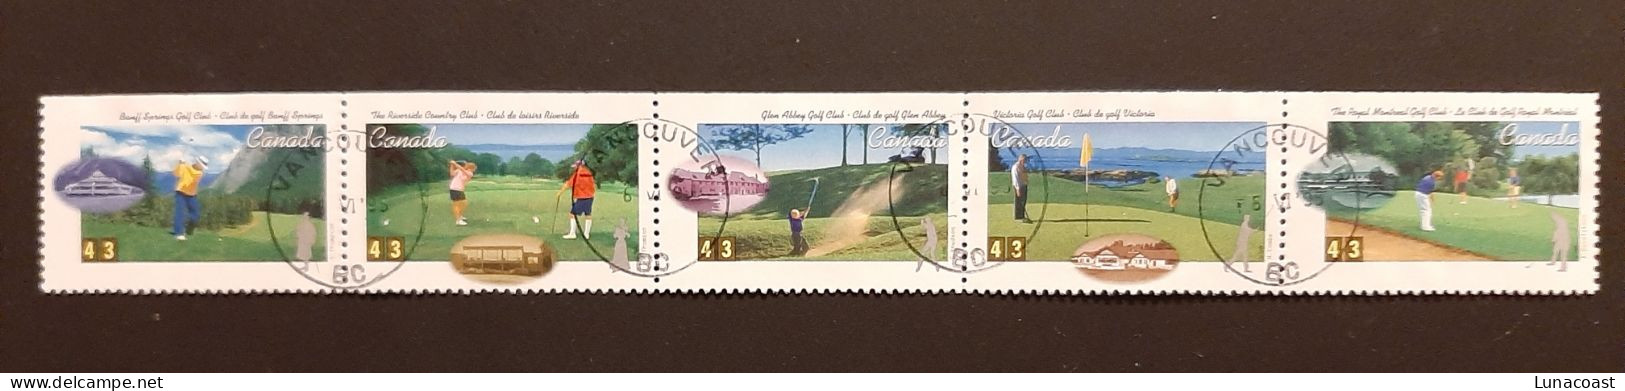 Canada 1995  USED  Sc1557a   Hor. Strip Of 5 X 43c, Golf In Canada - Used Stamps